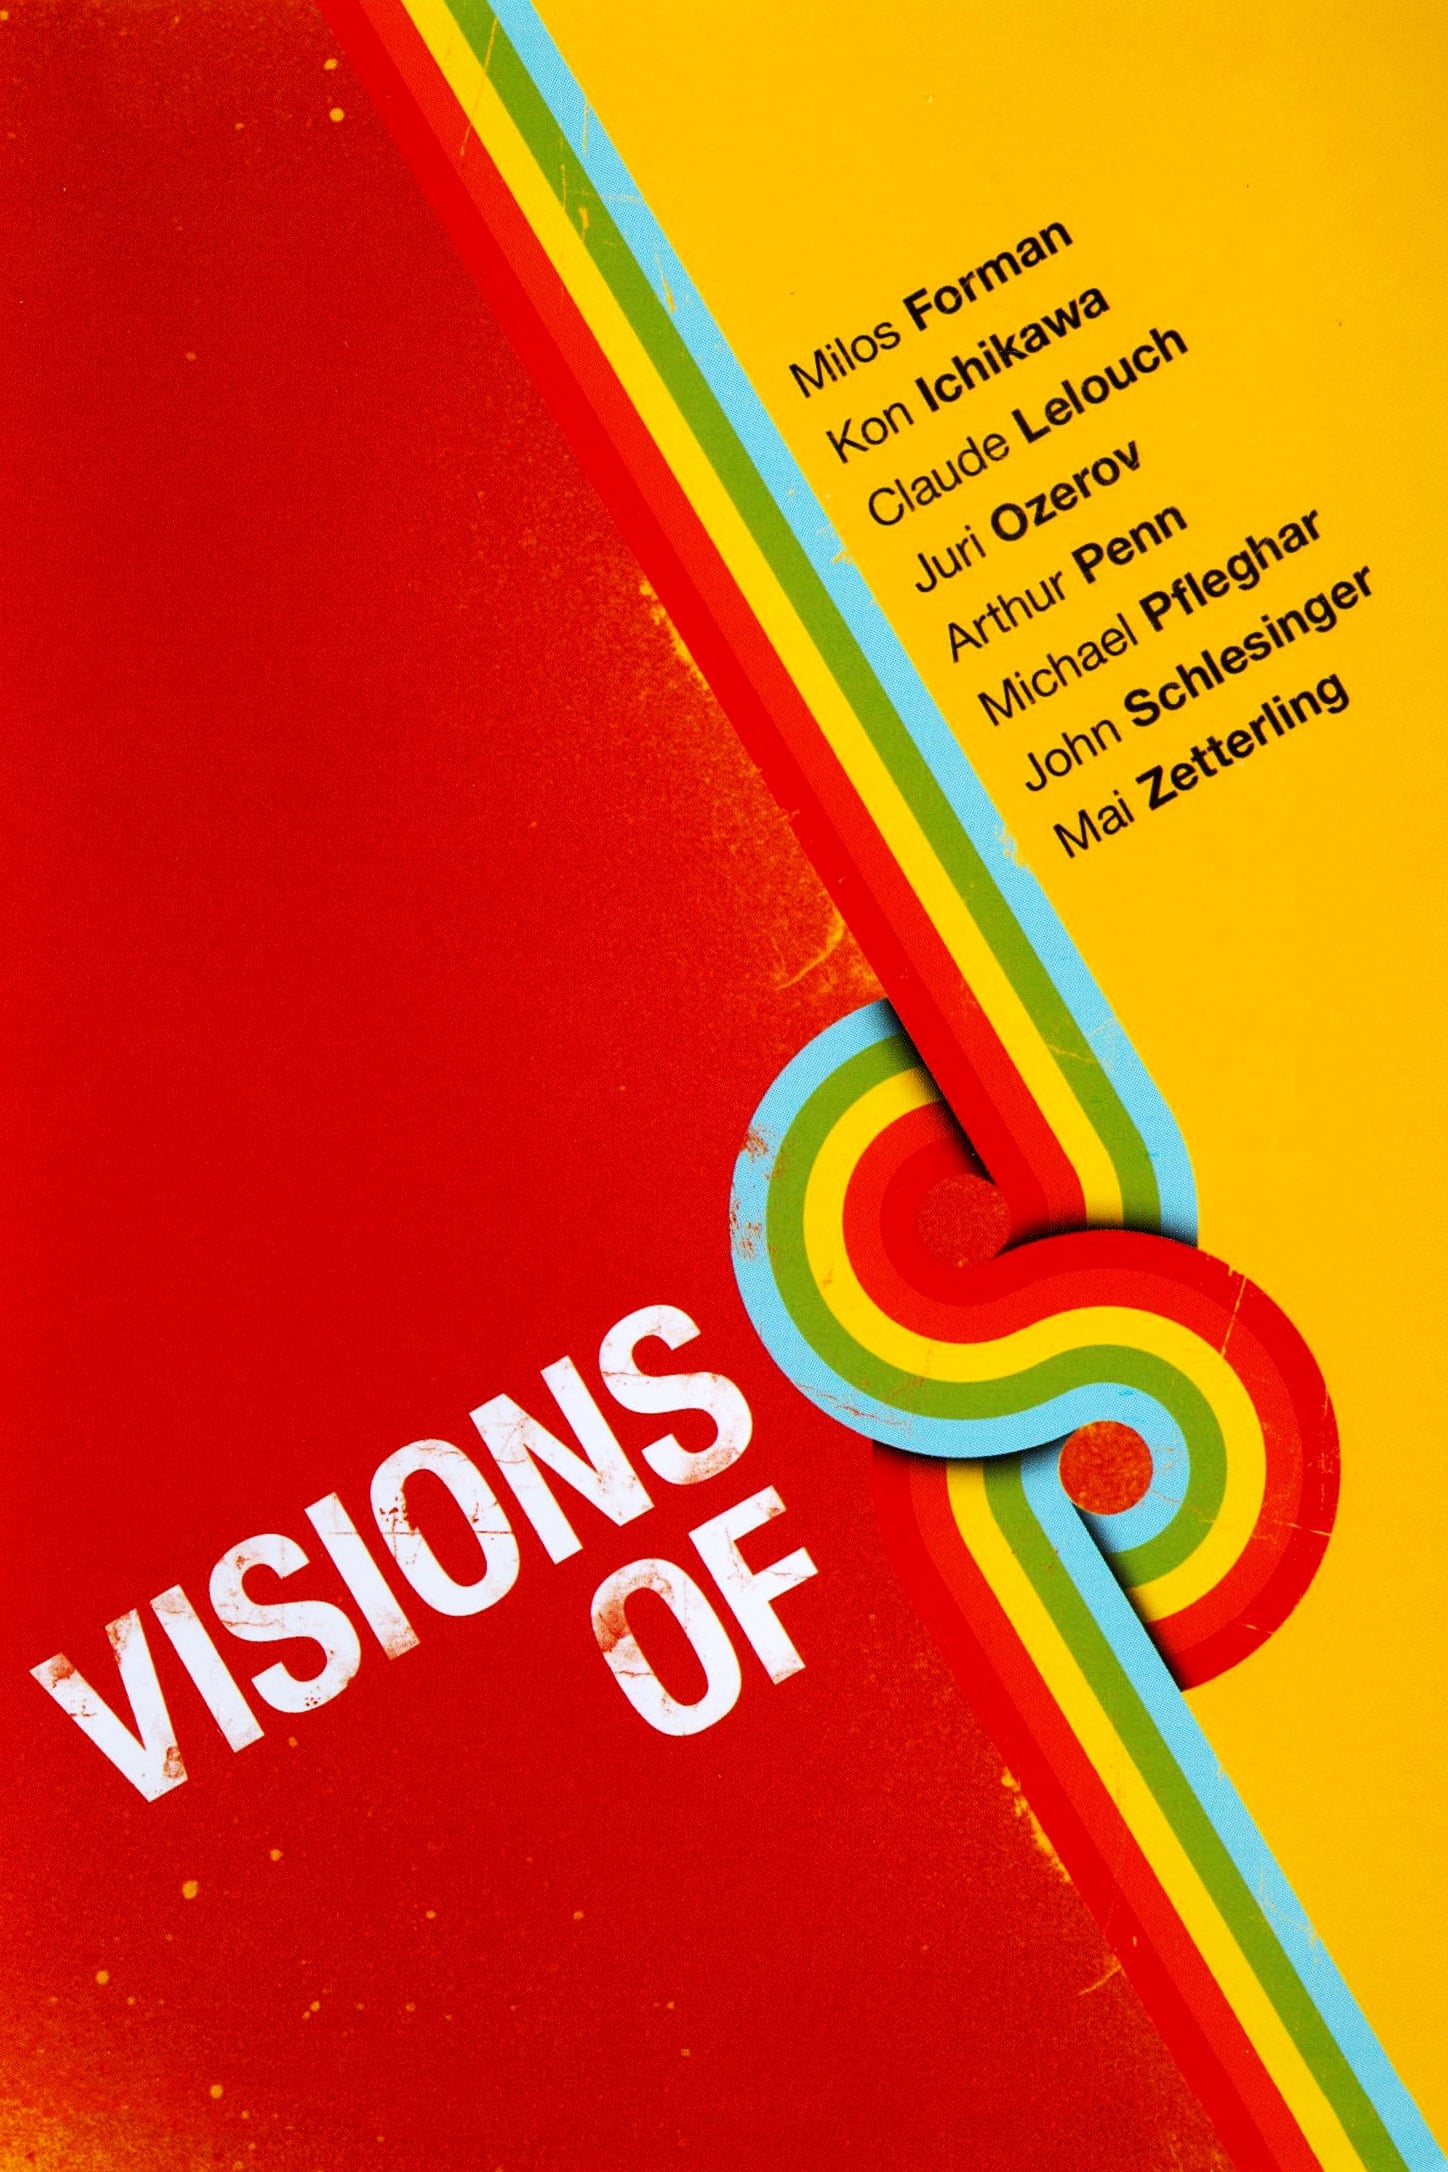 Visions of Eight (1973)